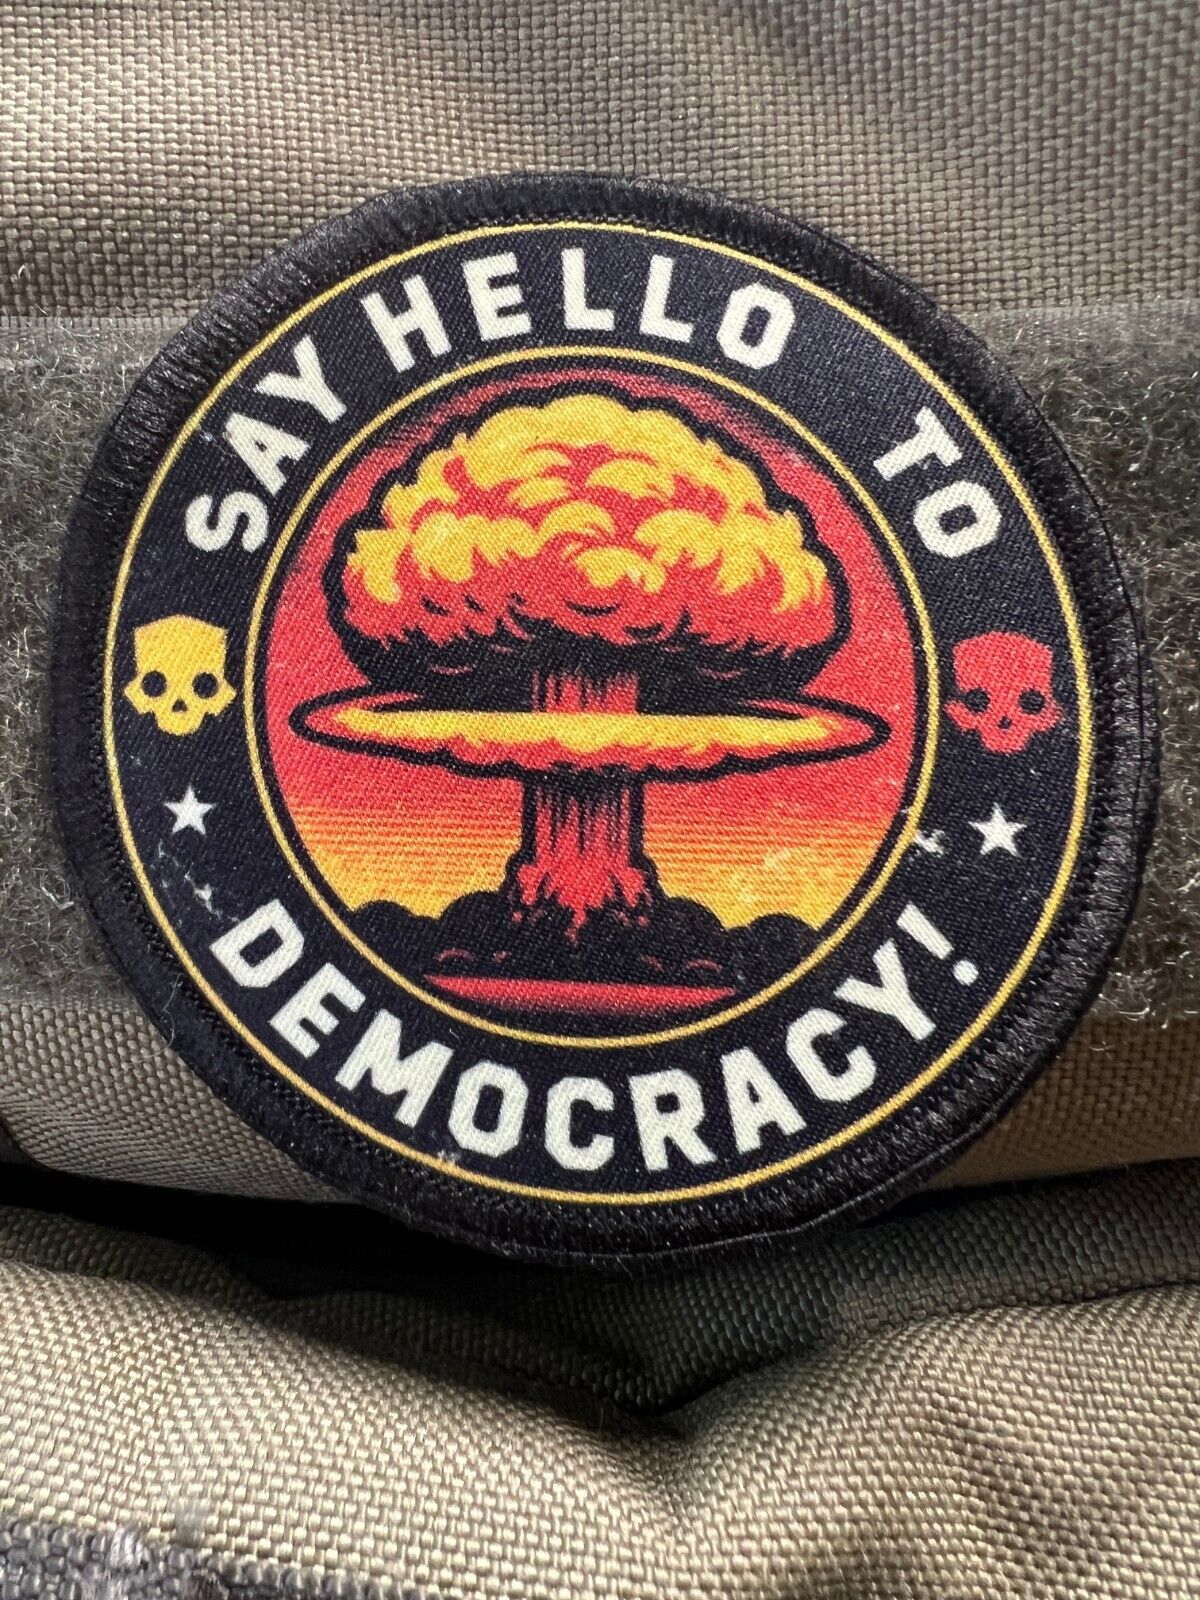 Say Hello to Democracy Helldivers2 Morale Patch Super Earth